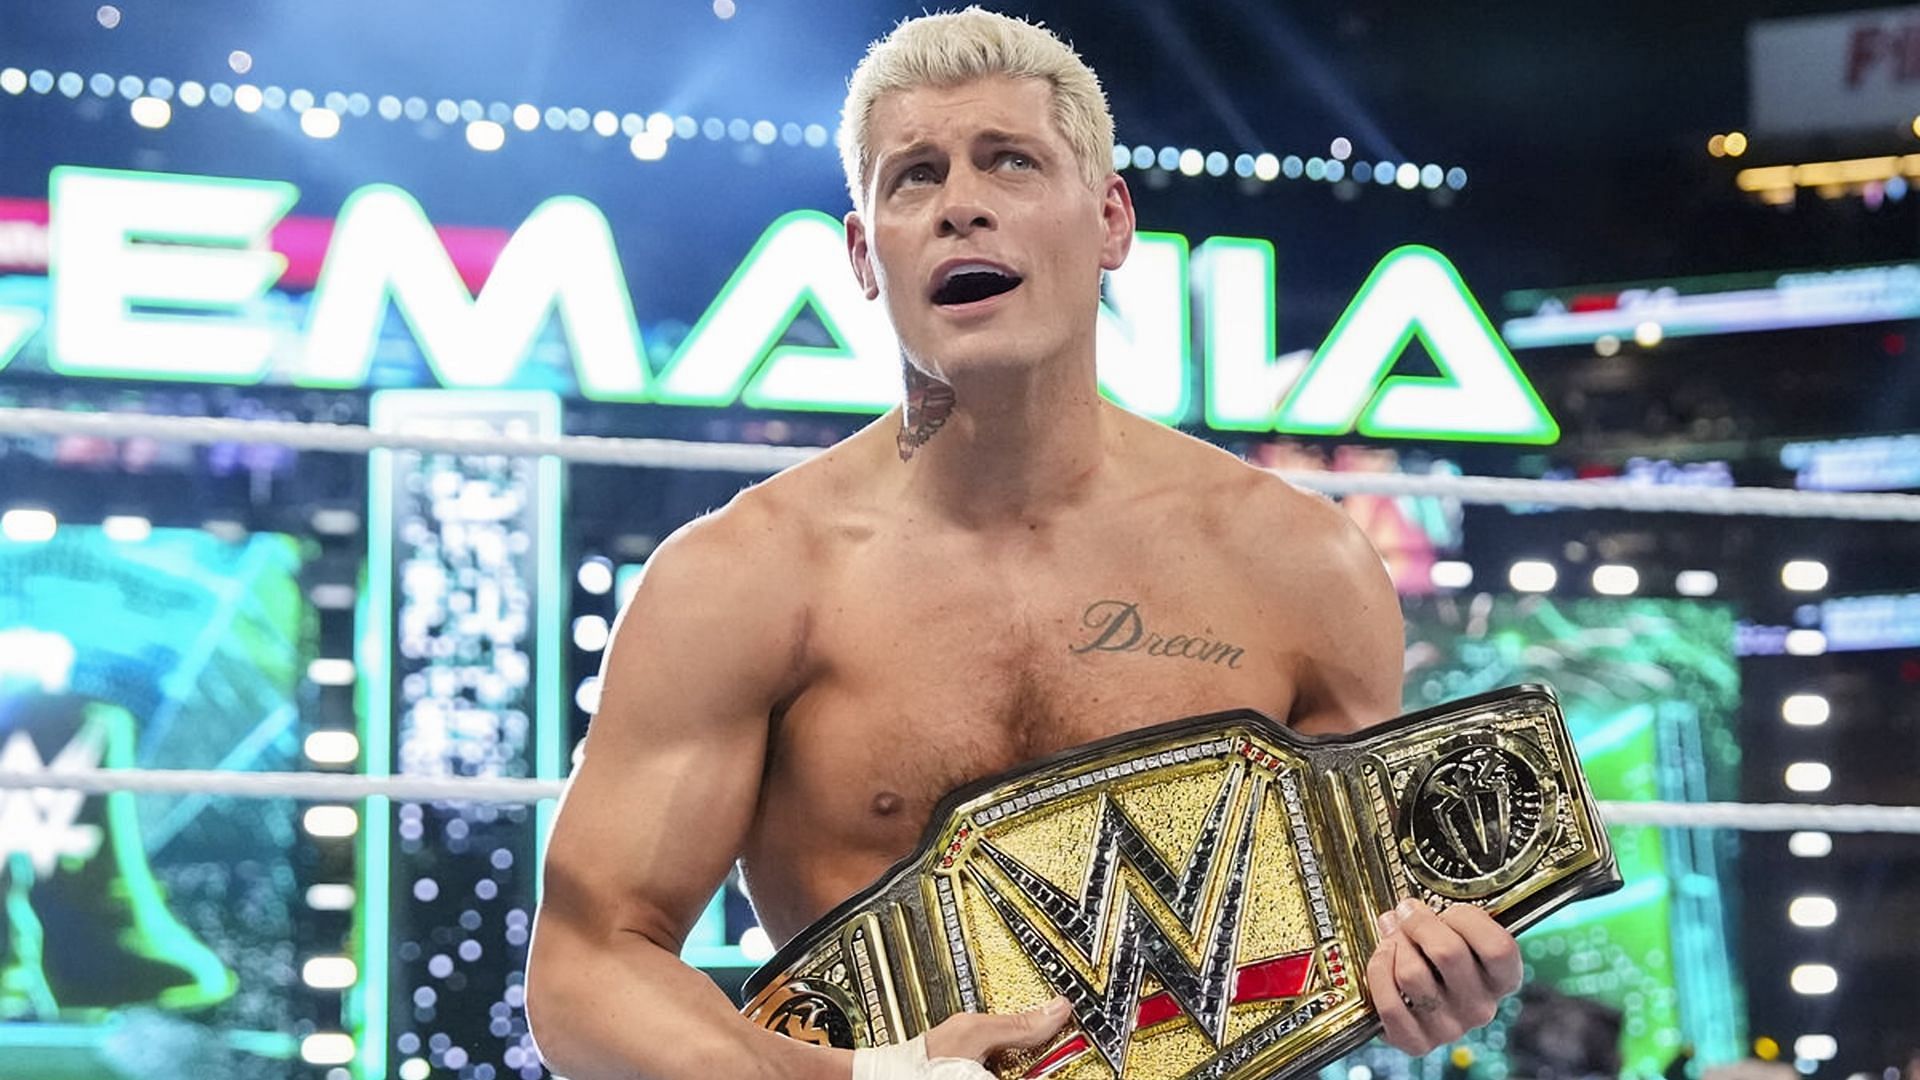 Cody Rhodes is the new Undisputed WWE Universal Champion (image credit: WWE.com)